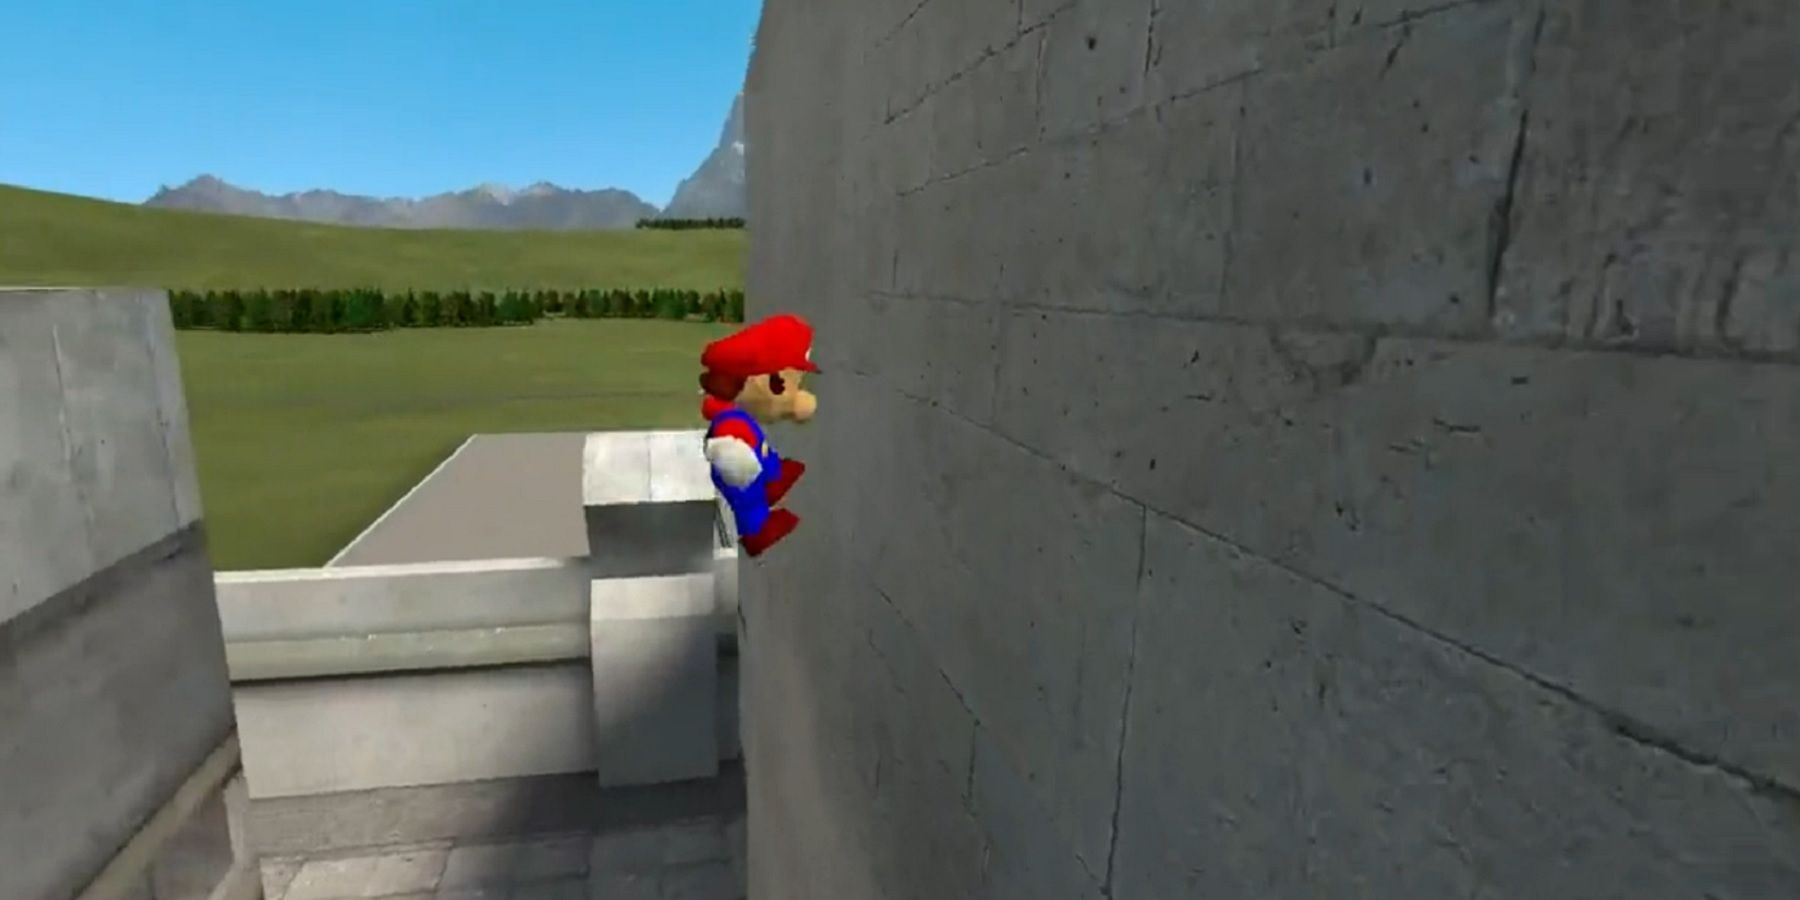 Mario is now in 'Garry's Mod' with his entire 'Super Mario 64' move set